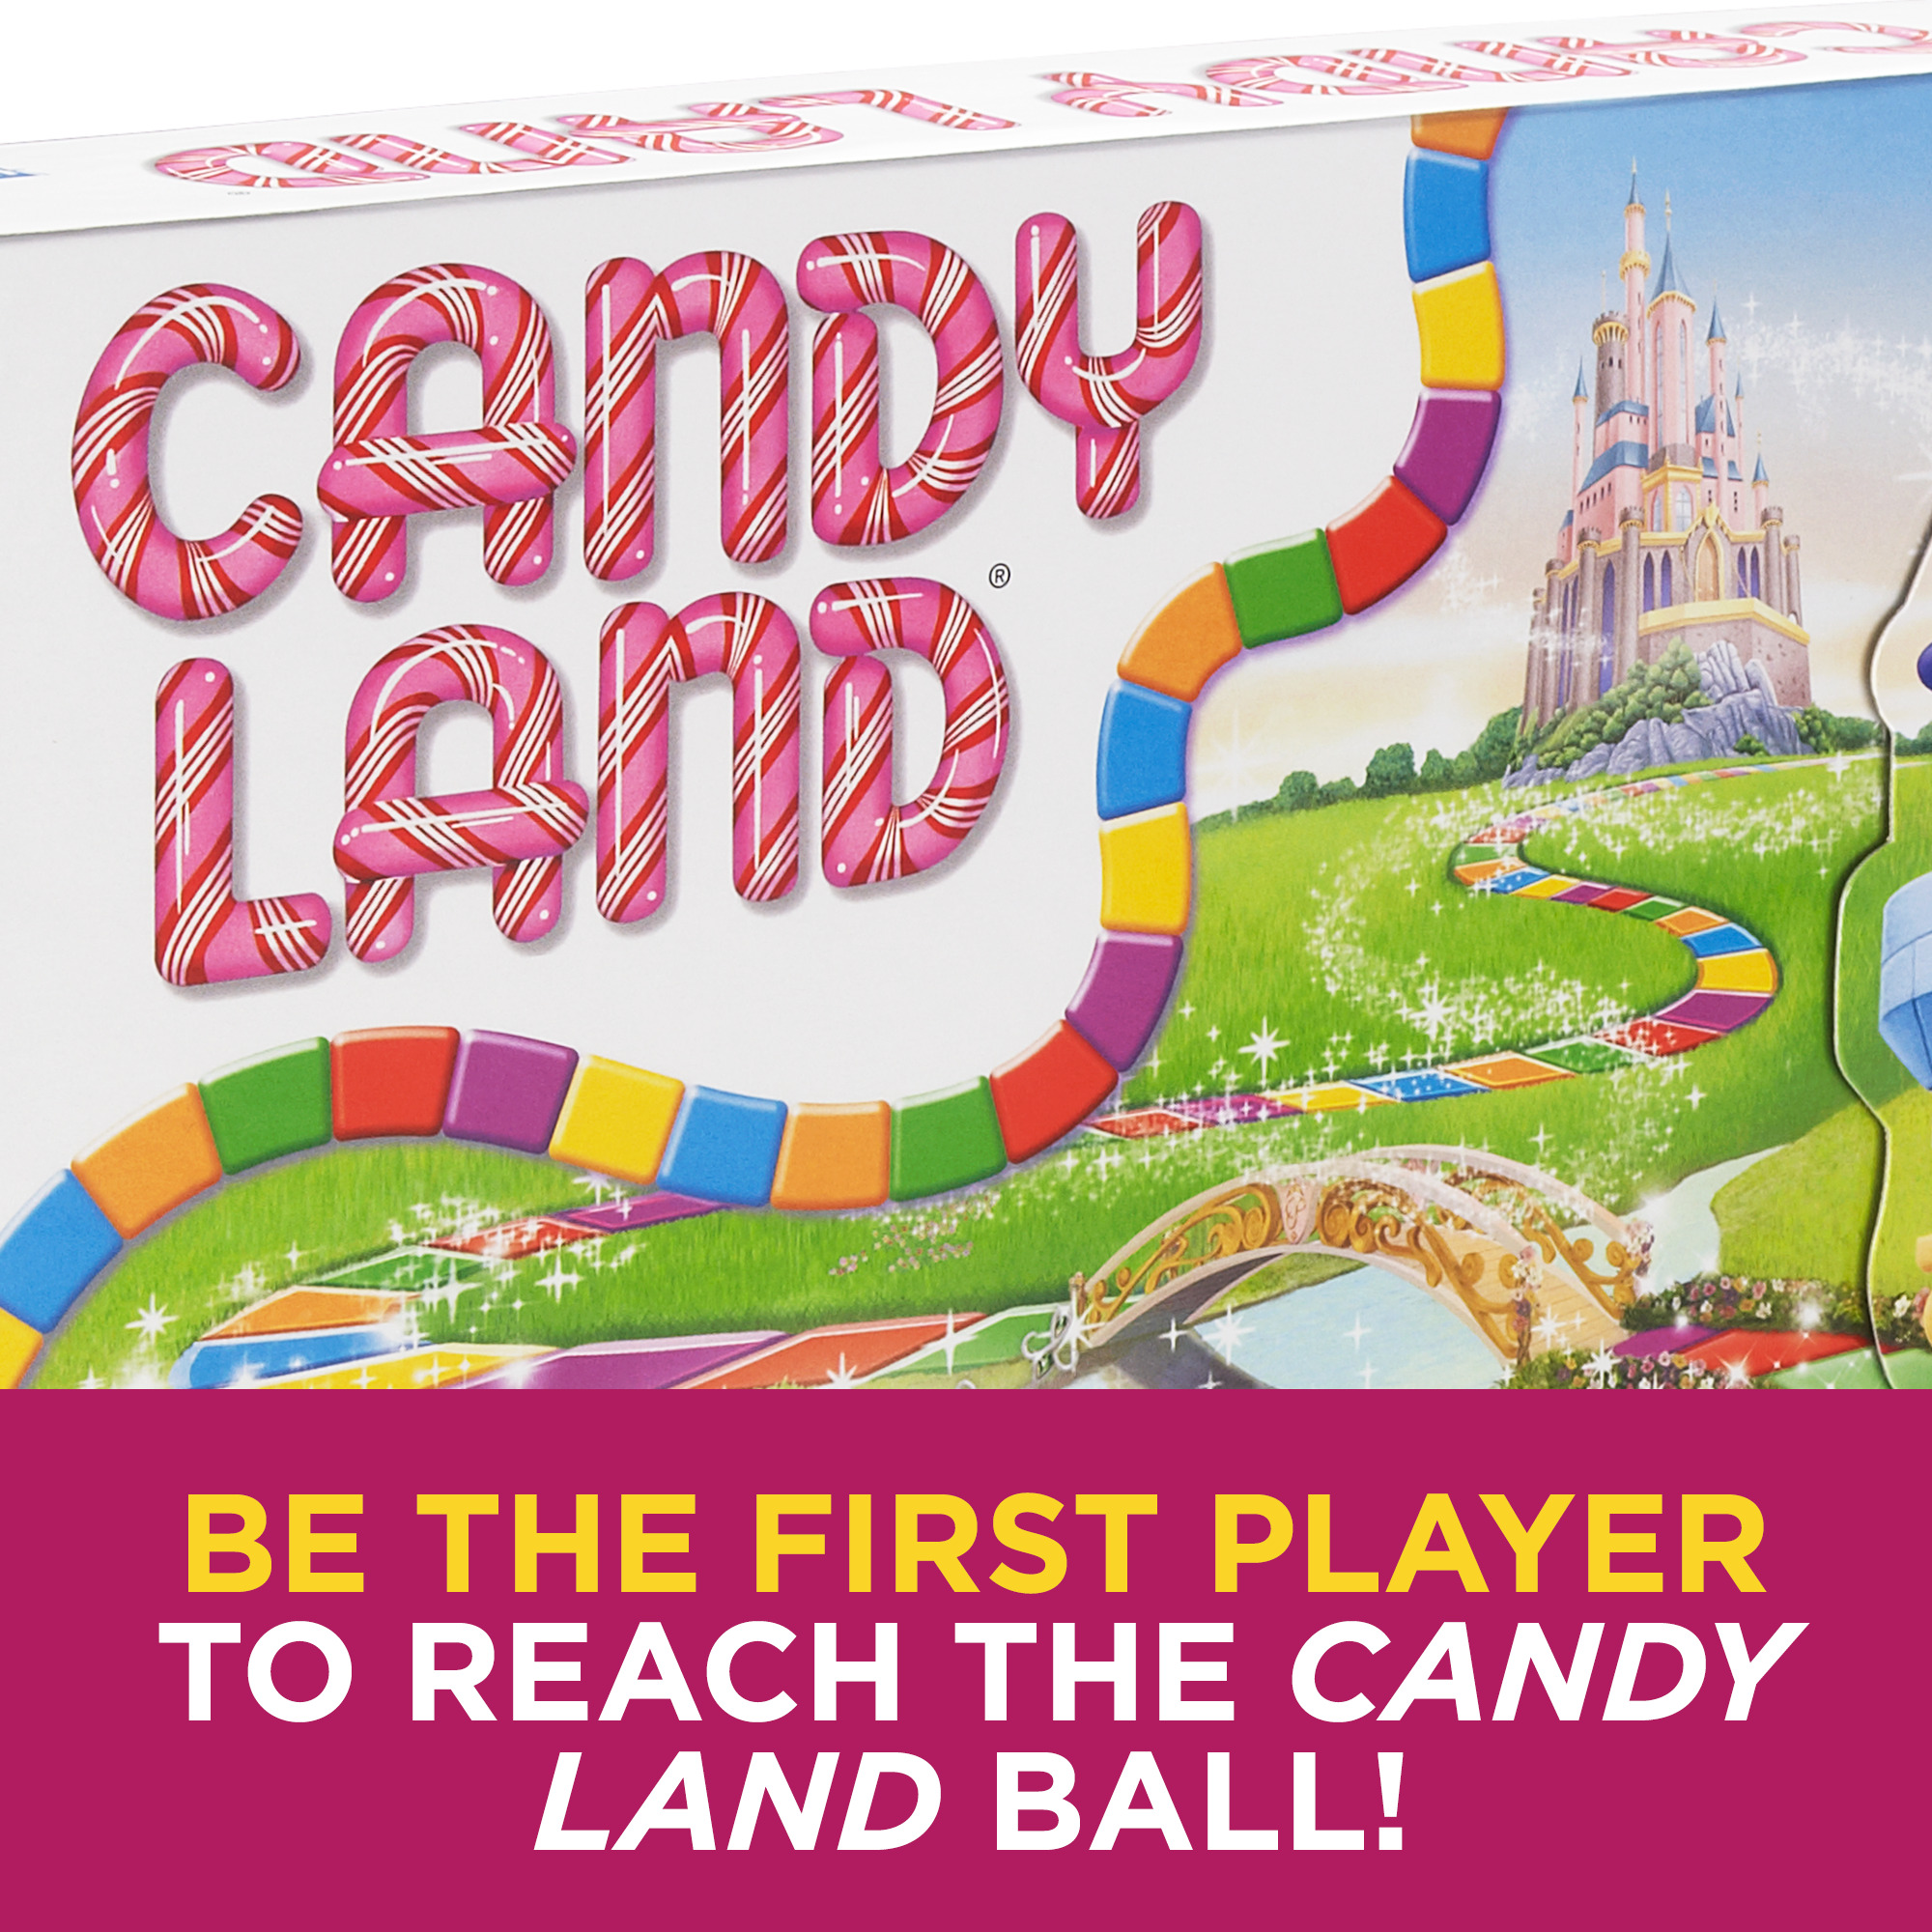 Candy Land Disney Princess Edition, For 2 to 4 players - image 5 of 9